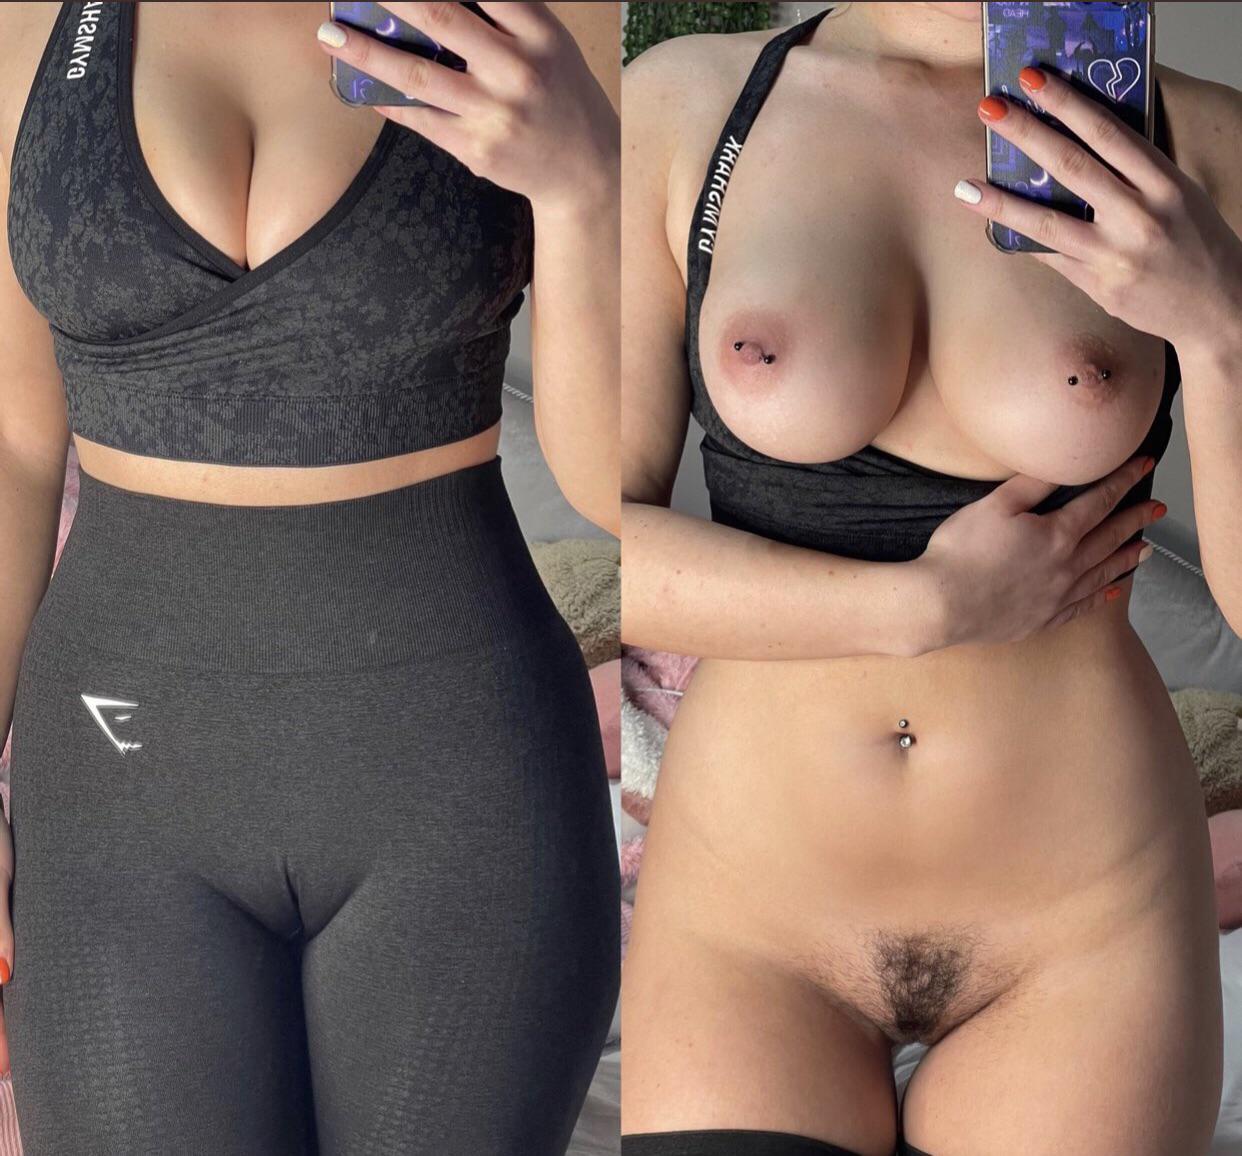 My camel toe looks hot as fuck in my gym leggings image